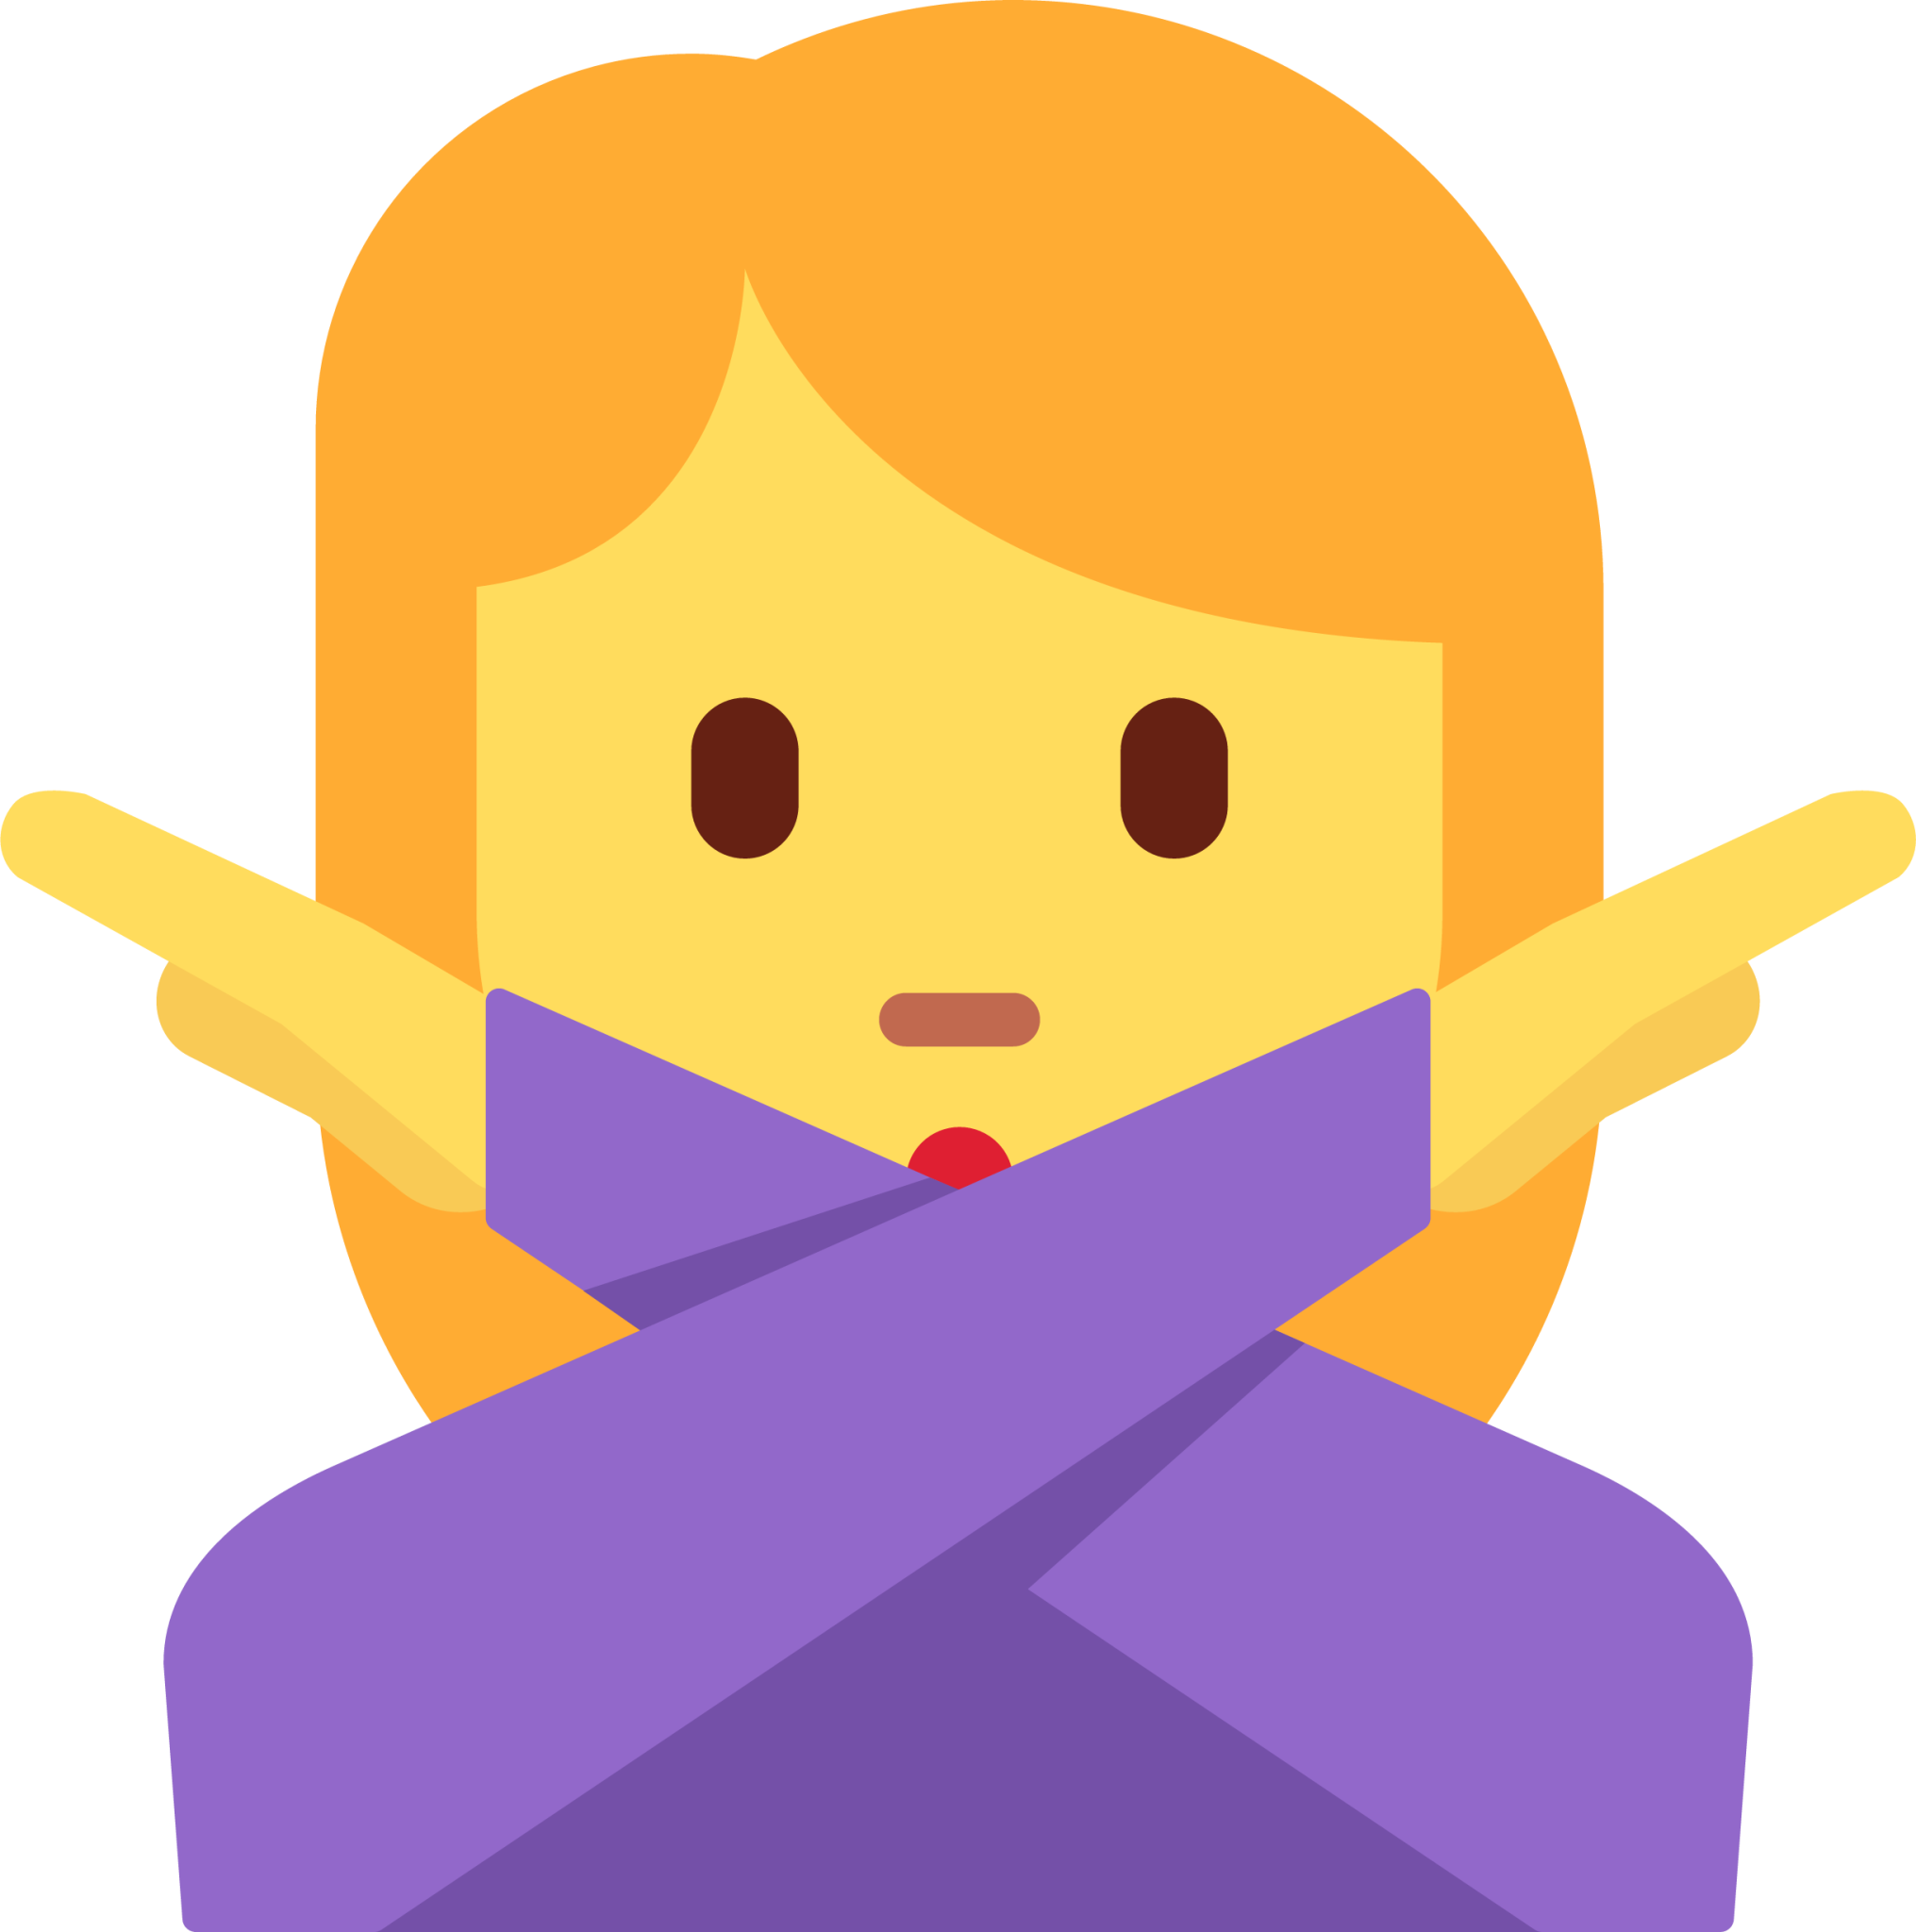 emoji girl with arms crossed